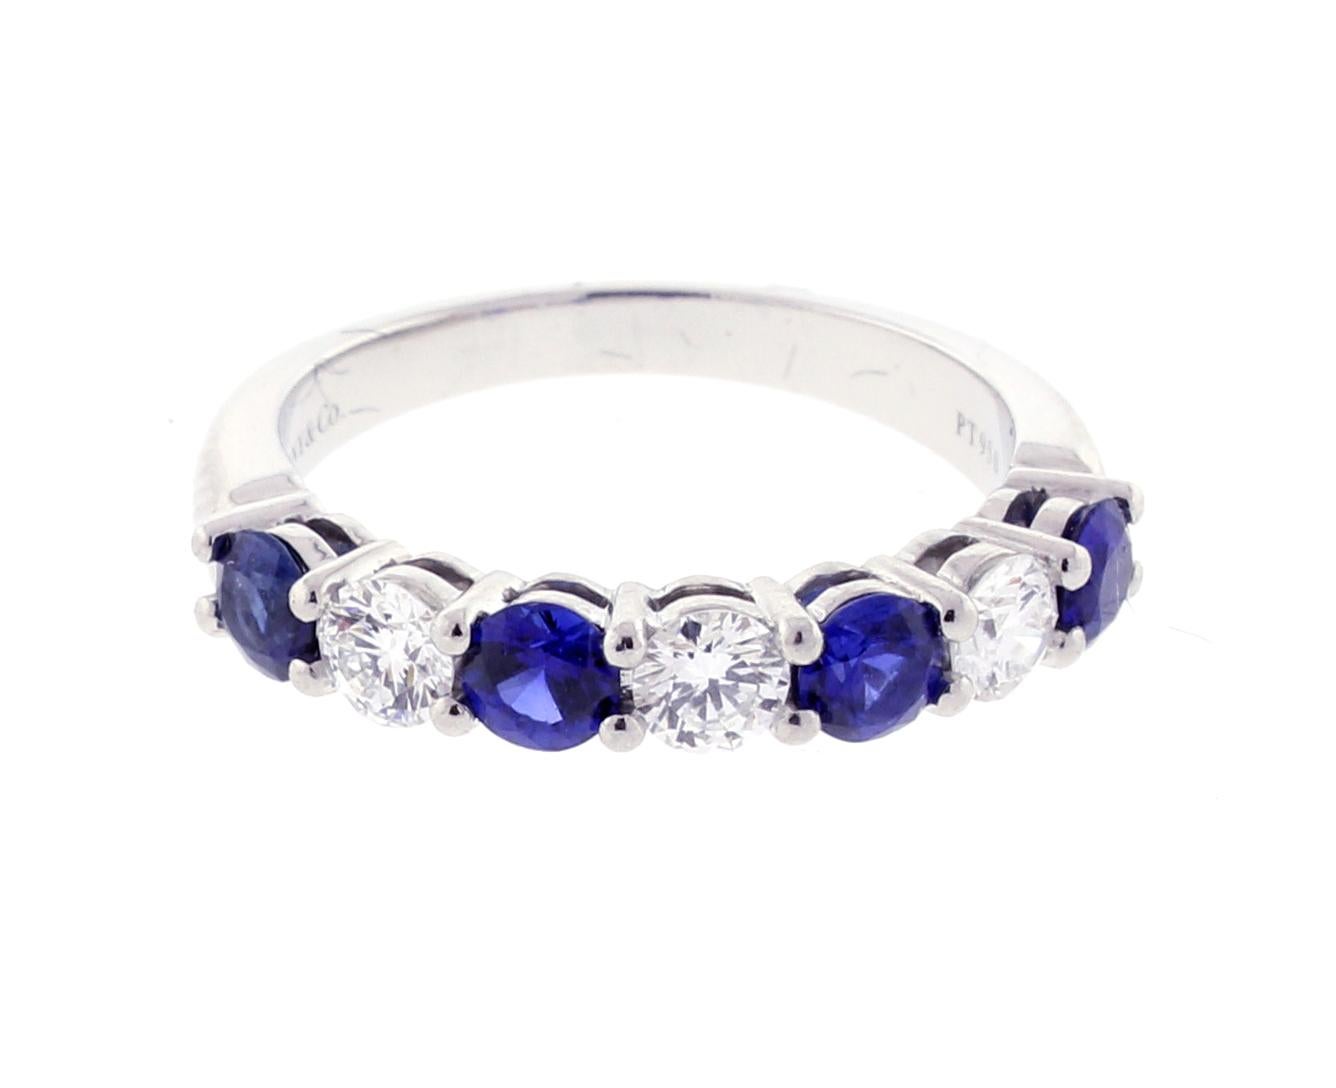 From Tiffany and Co. a sapphire and diamond shared prong band ring.
♦ Designer / Hallmarks: Tiffany & Co
♦ Metal: Platinum
♦ Gem stone: 3 Diamonds = approximately .40 carats  
♦ Gem stone: 4 sapphires =  approximately .60 total carats  
♦ Design